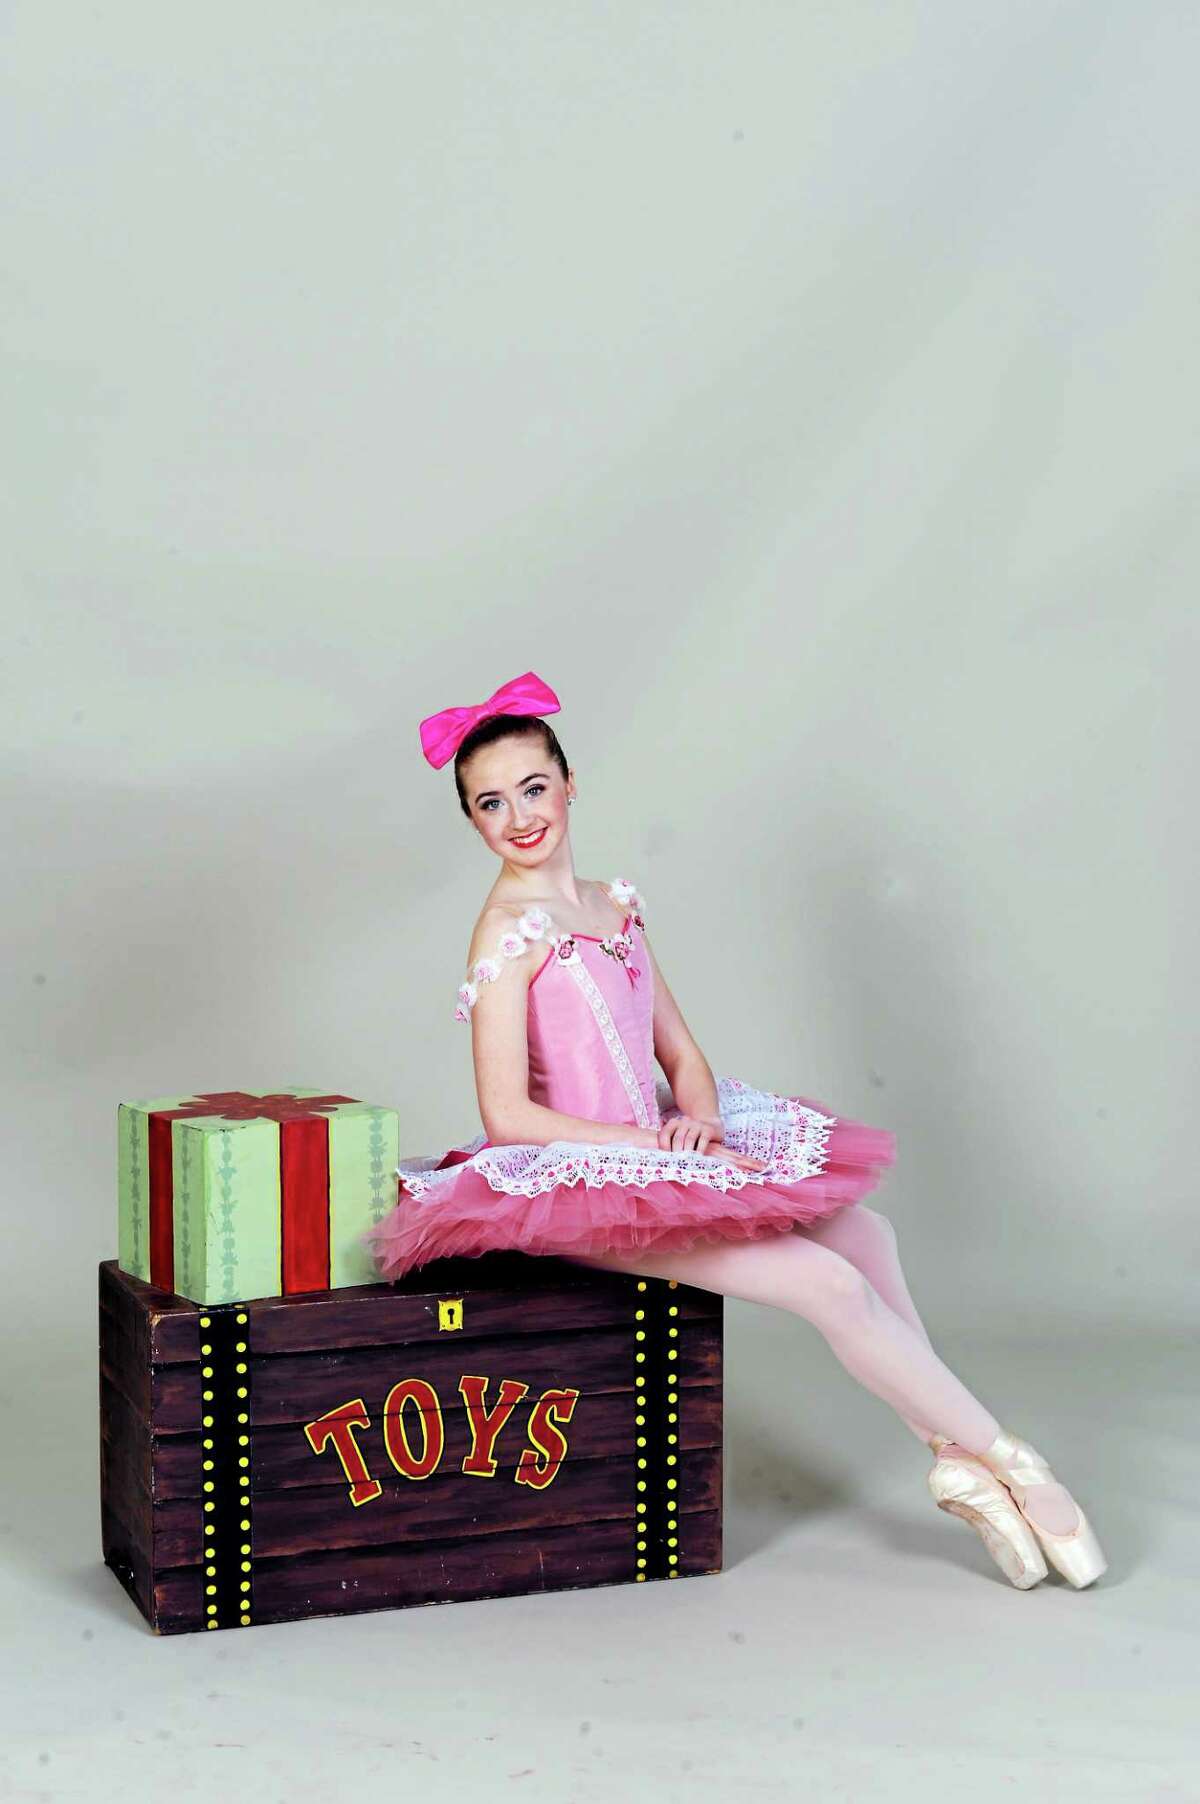 Tierin-Rose Mandelburg in Eastern Connecticut Ballet’s “The Magic Toy Shoppe” Saturday and Sunday.